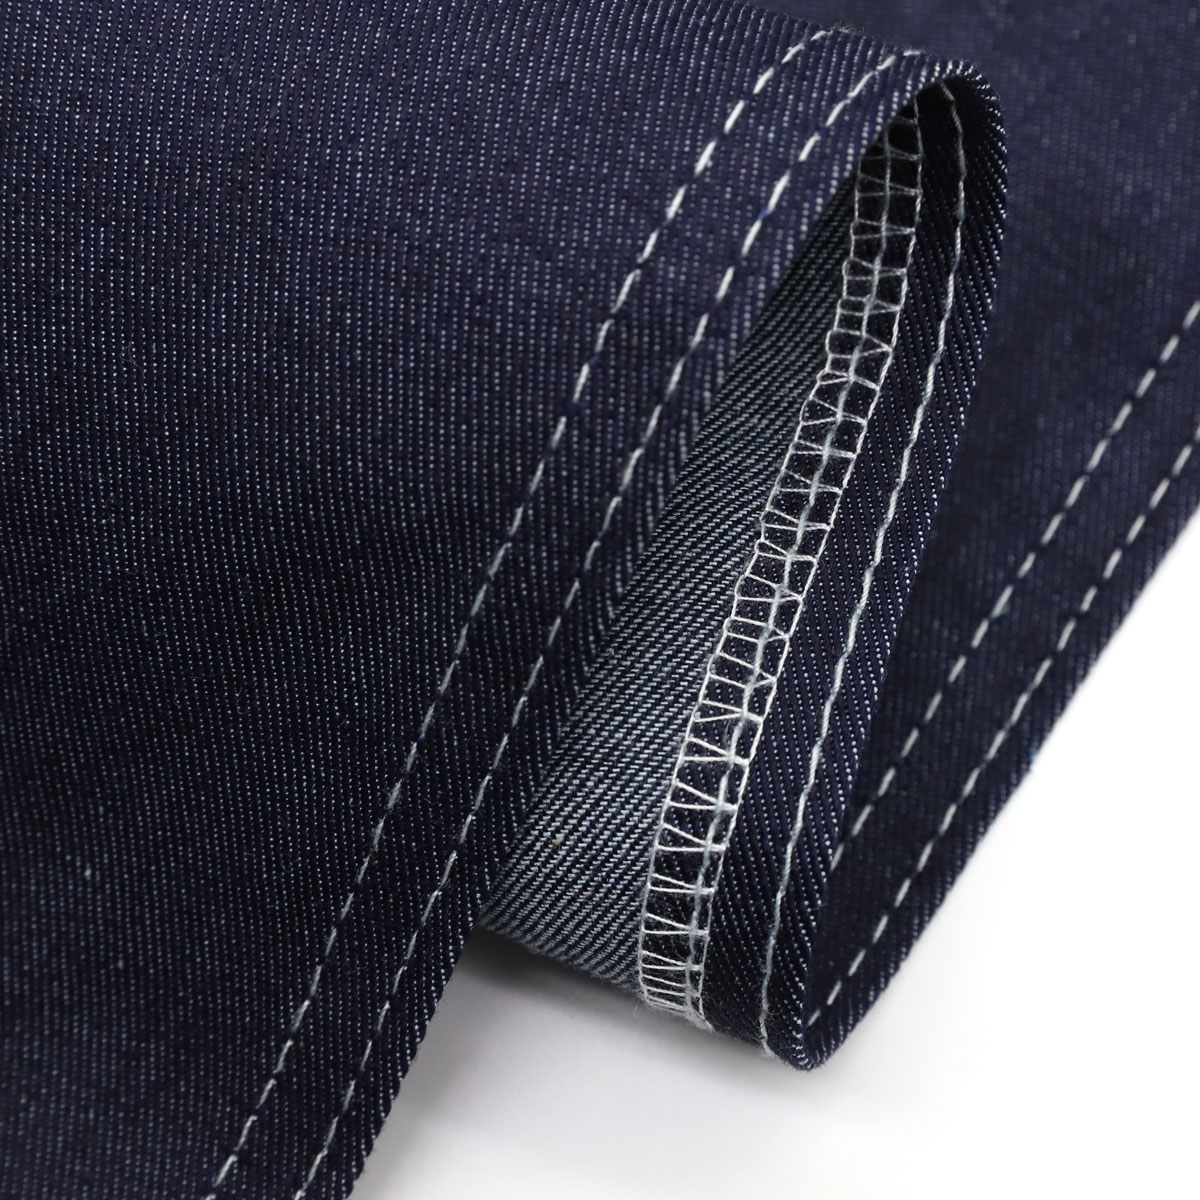 Cotton Denim Fabric: the Best Fabric for Your next Project 2